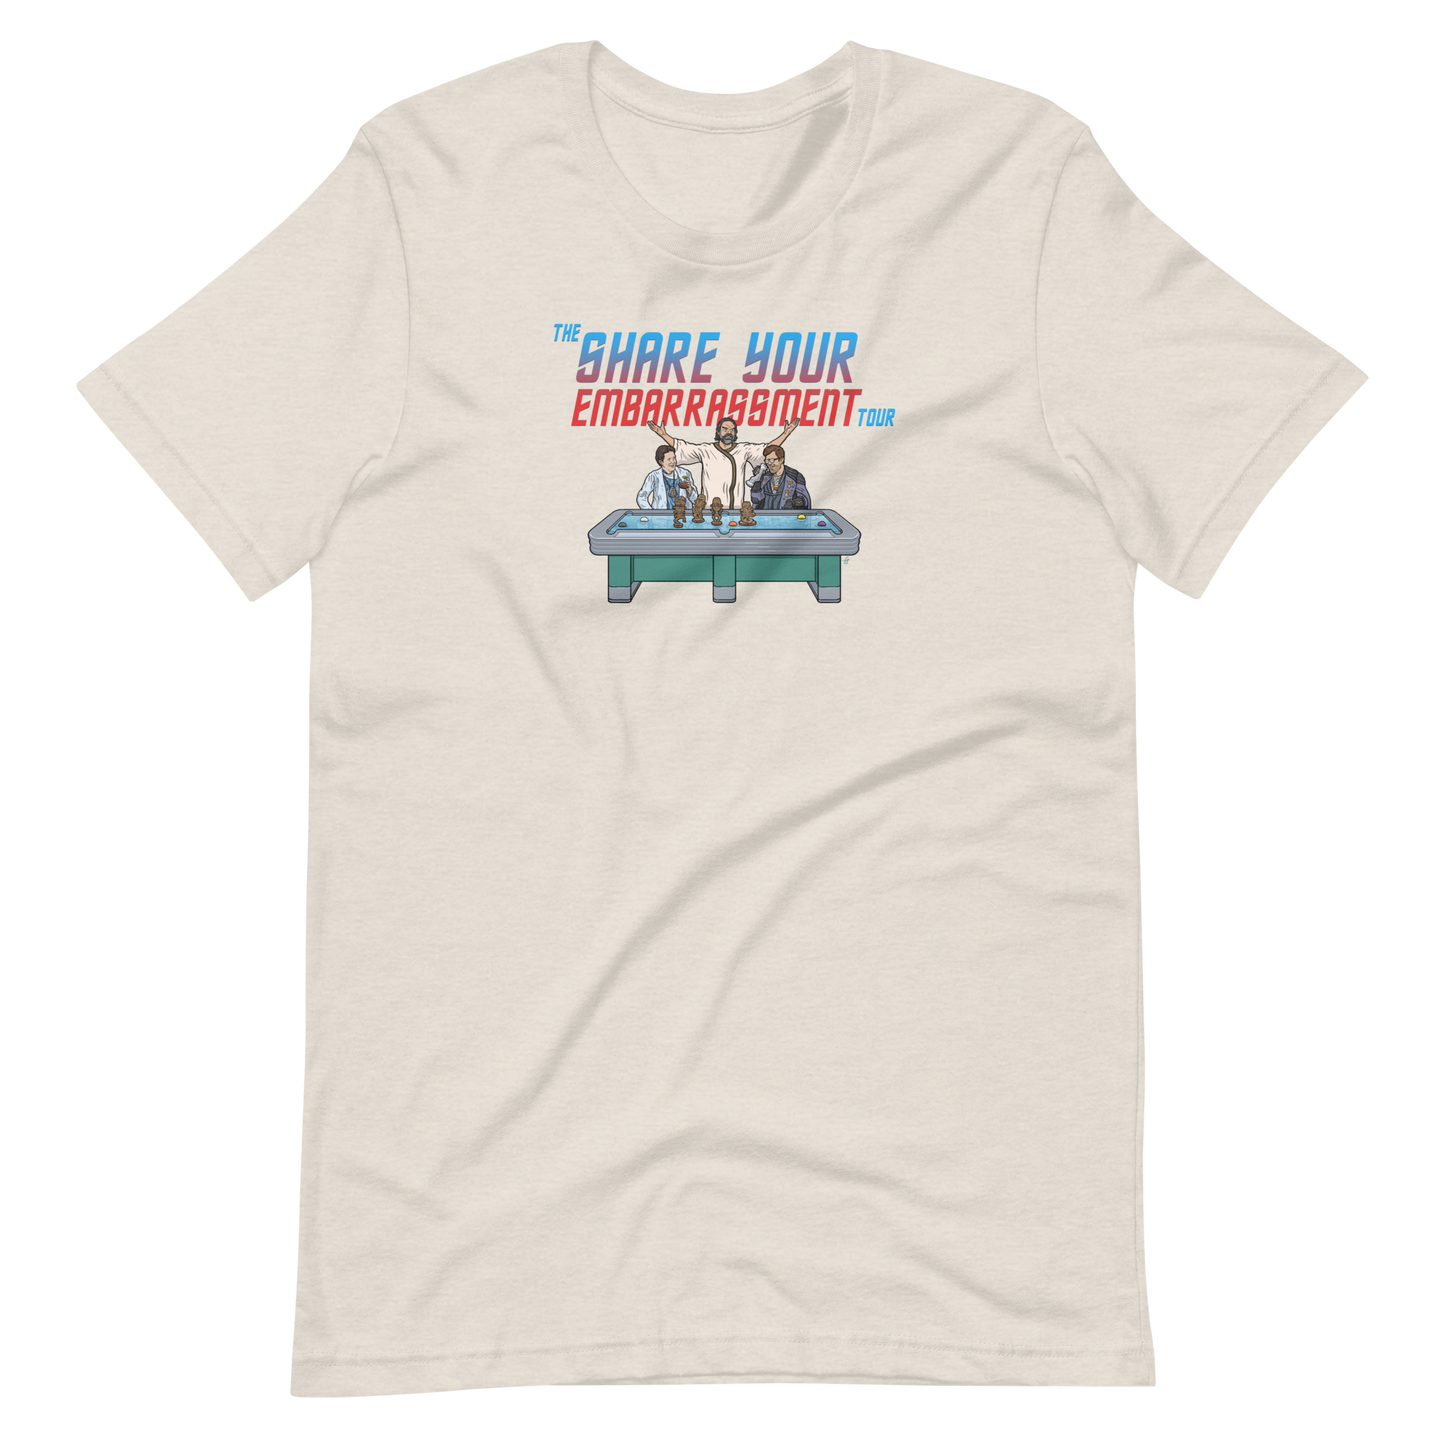 The Share Your Embarrassment Tour T-Shirt